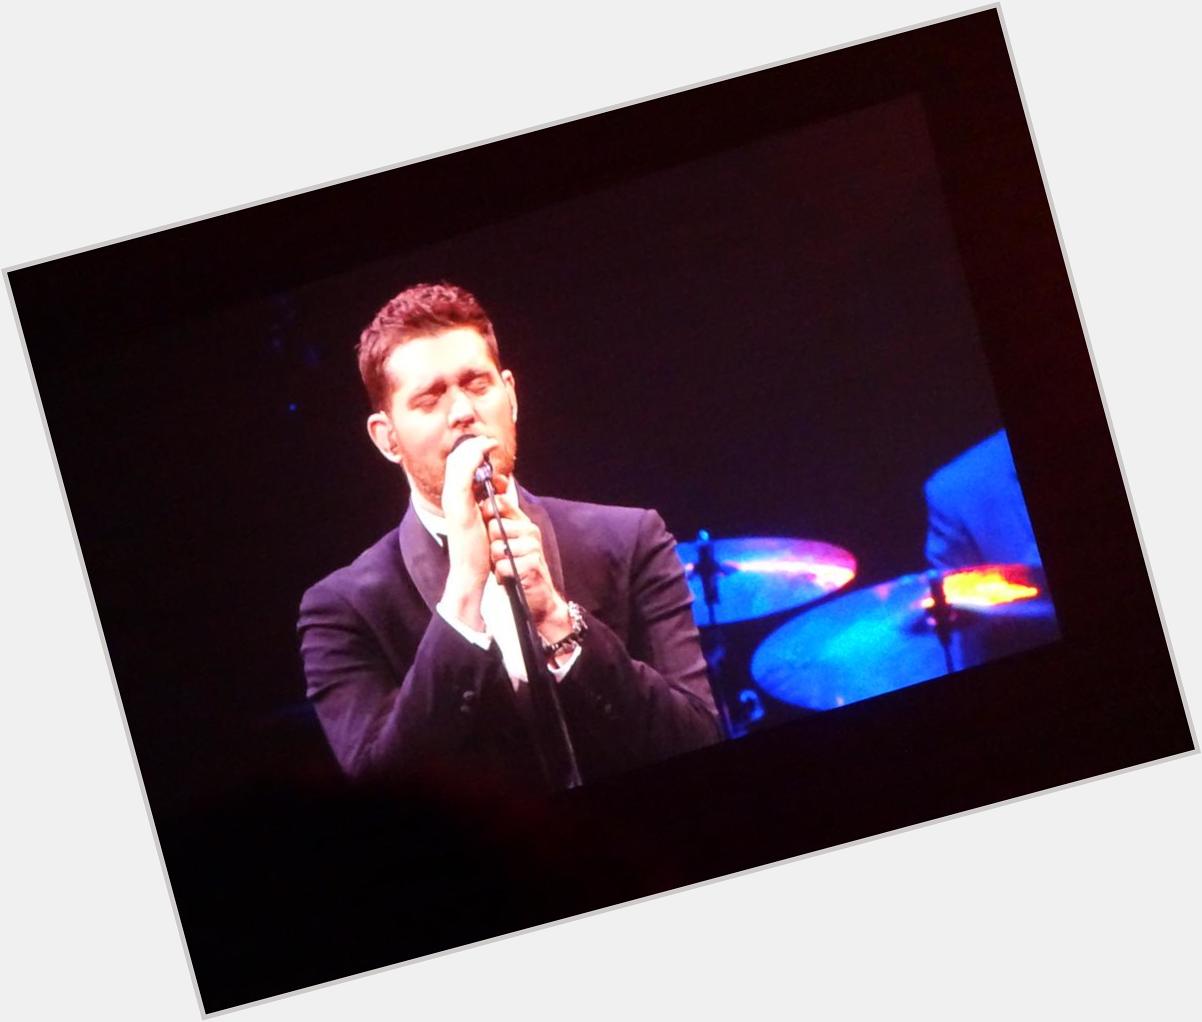 HAPPY BIRTHDAY to one of my favourite singers- Michael Bublé!! It\s been too long since I\ve seen you live 